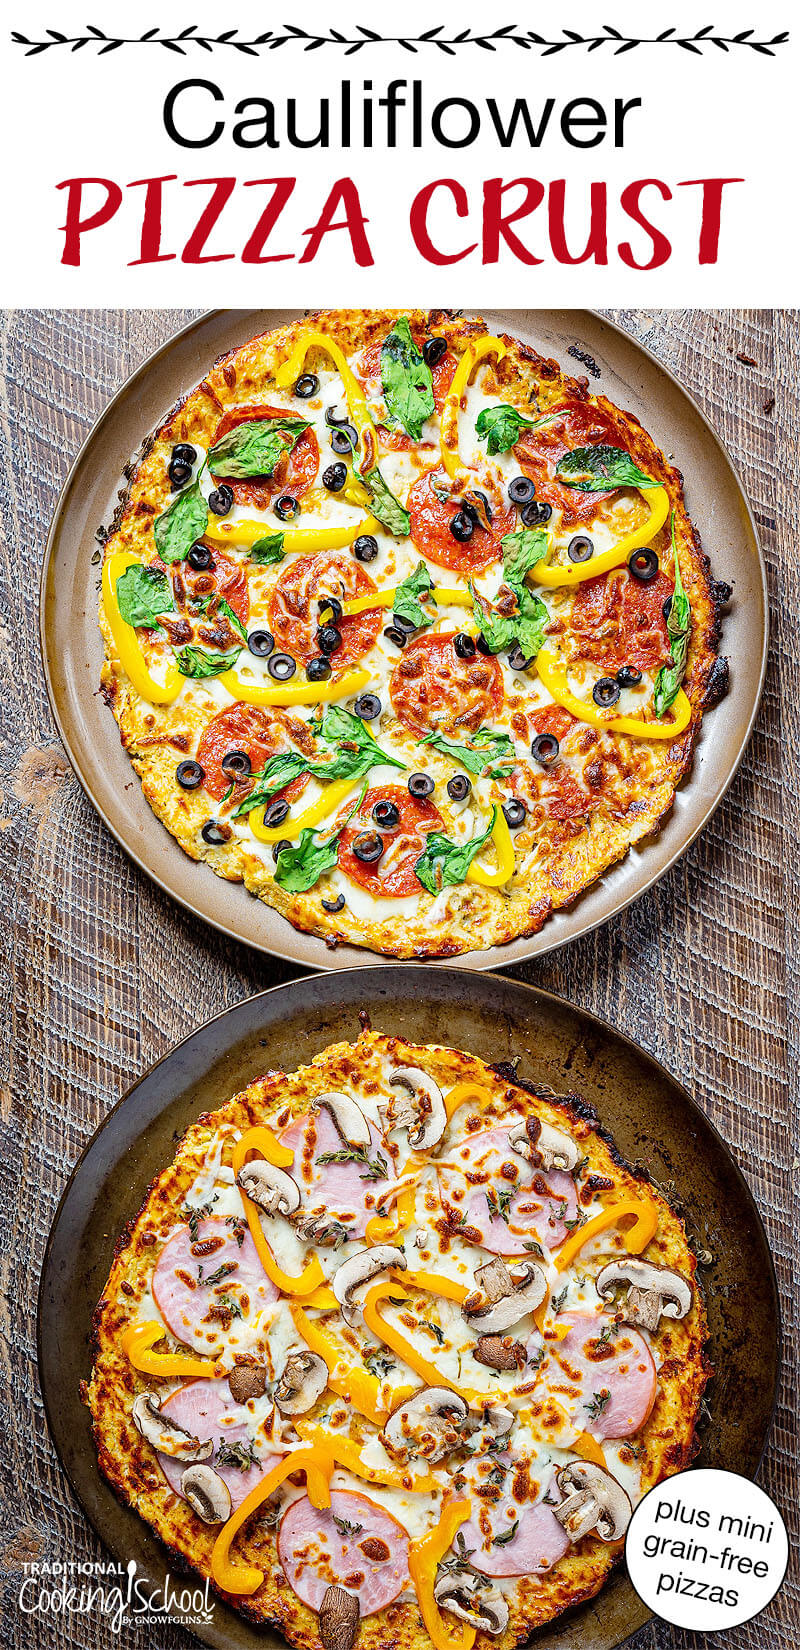 Two cauliflower pizzas on baking trays topped with fresh veggies and meats. Text overlay says: "Cauliflower Pizza Crust Recipe (plus mini grain-free pizzas)"